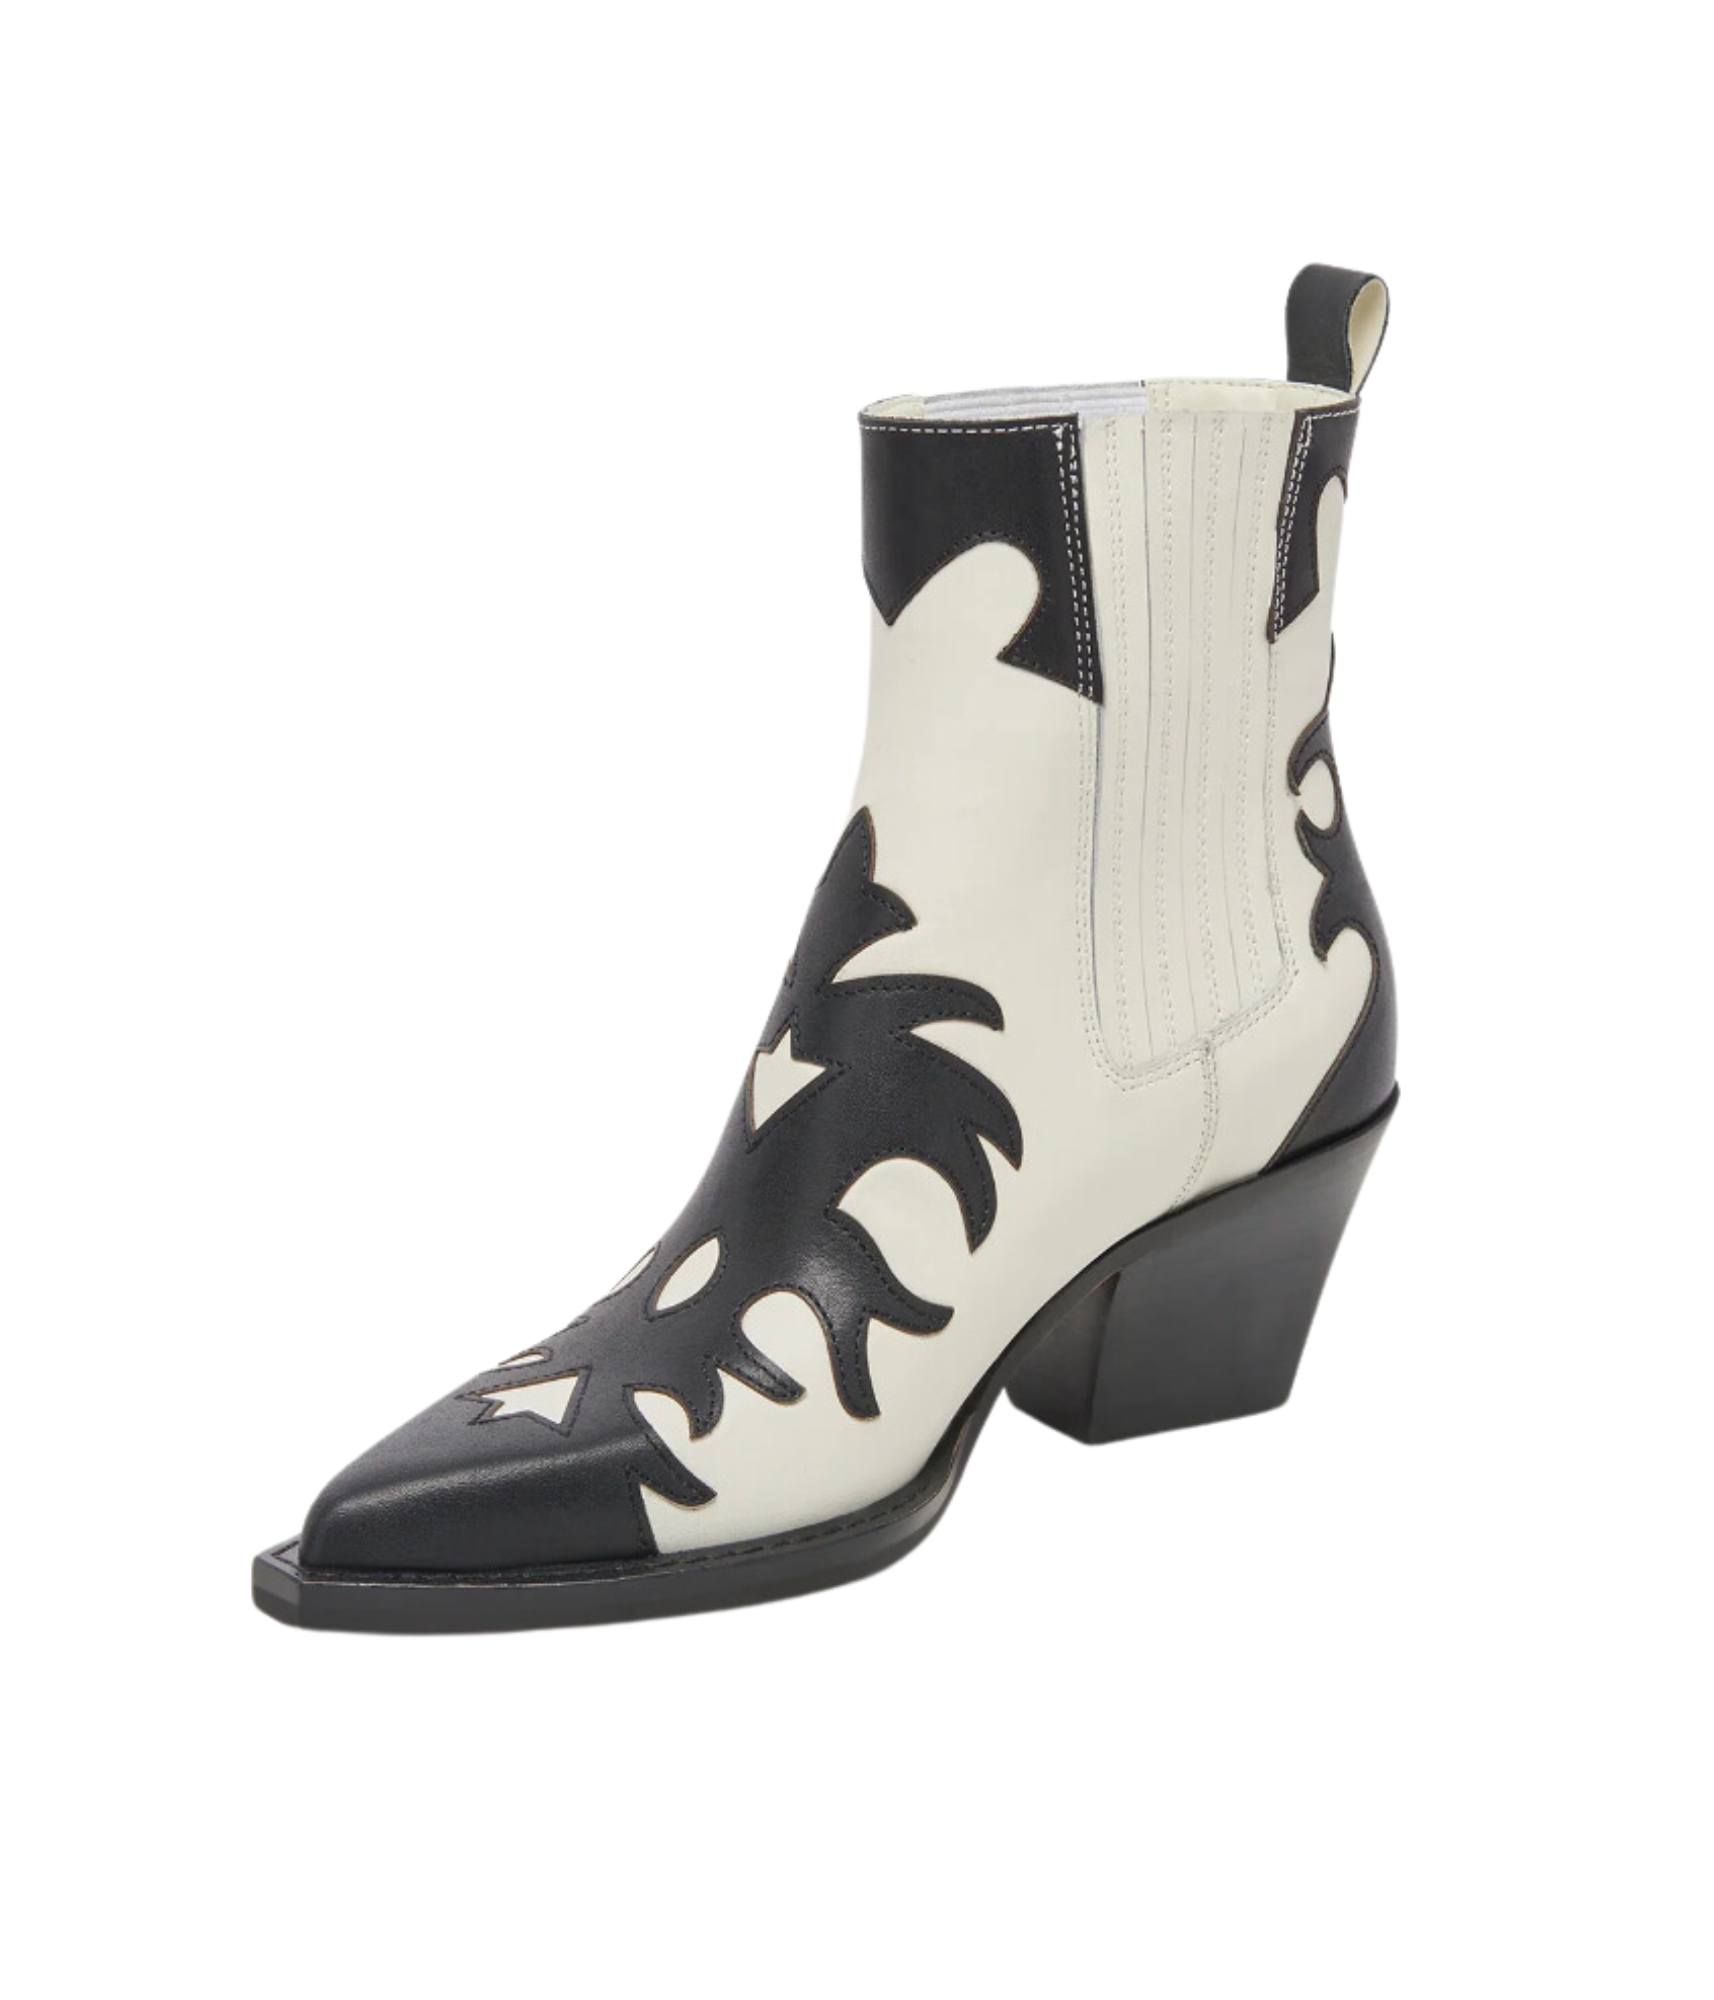 Renia Ankle Boots in Black and White